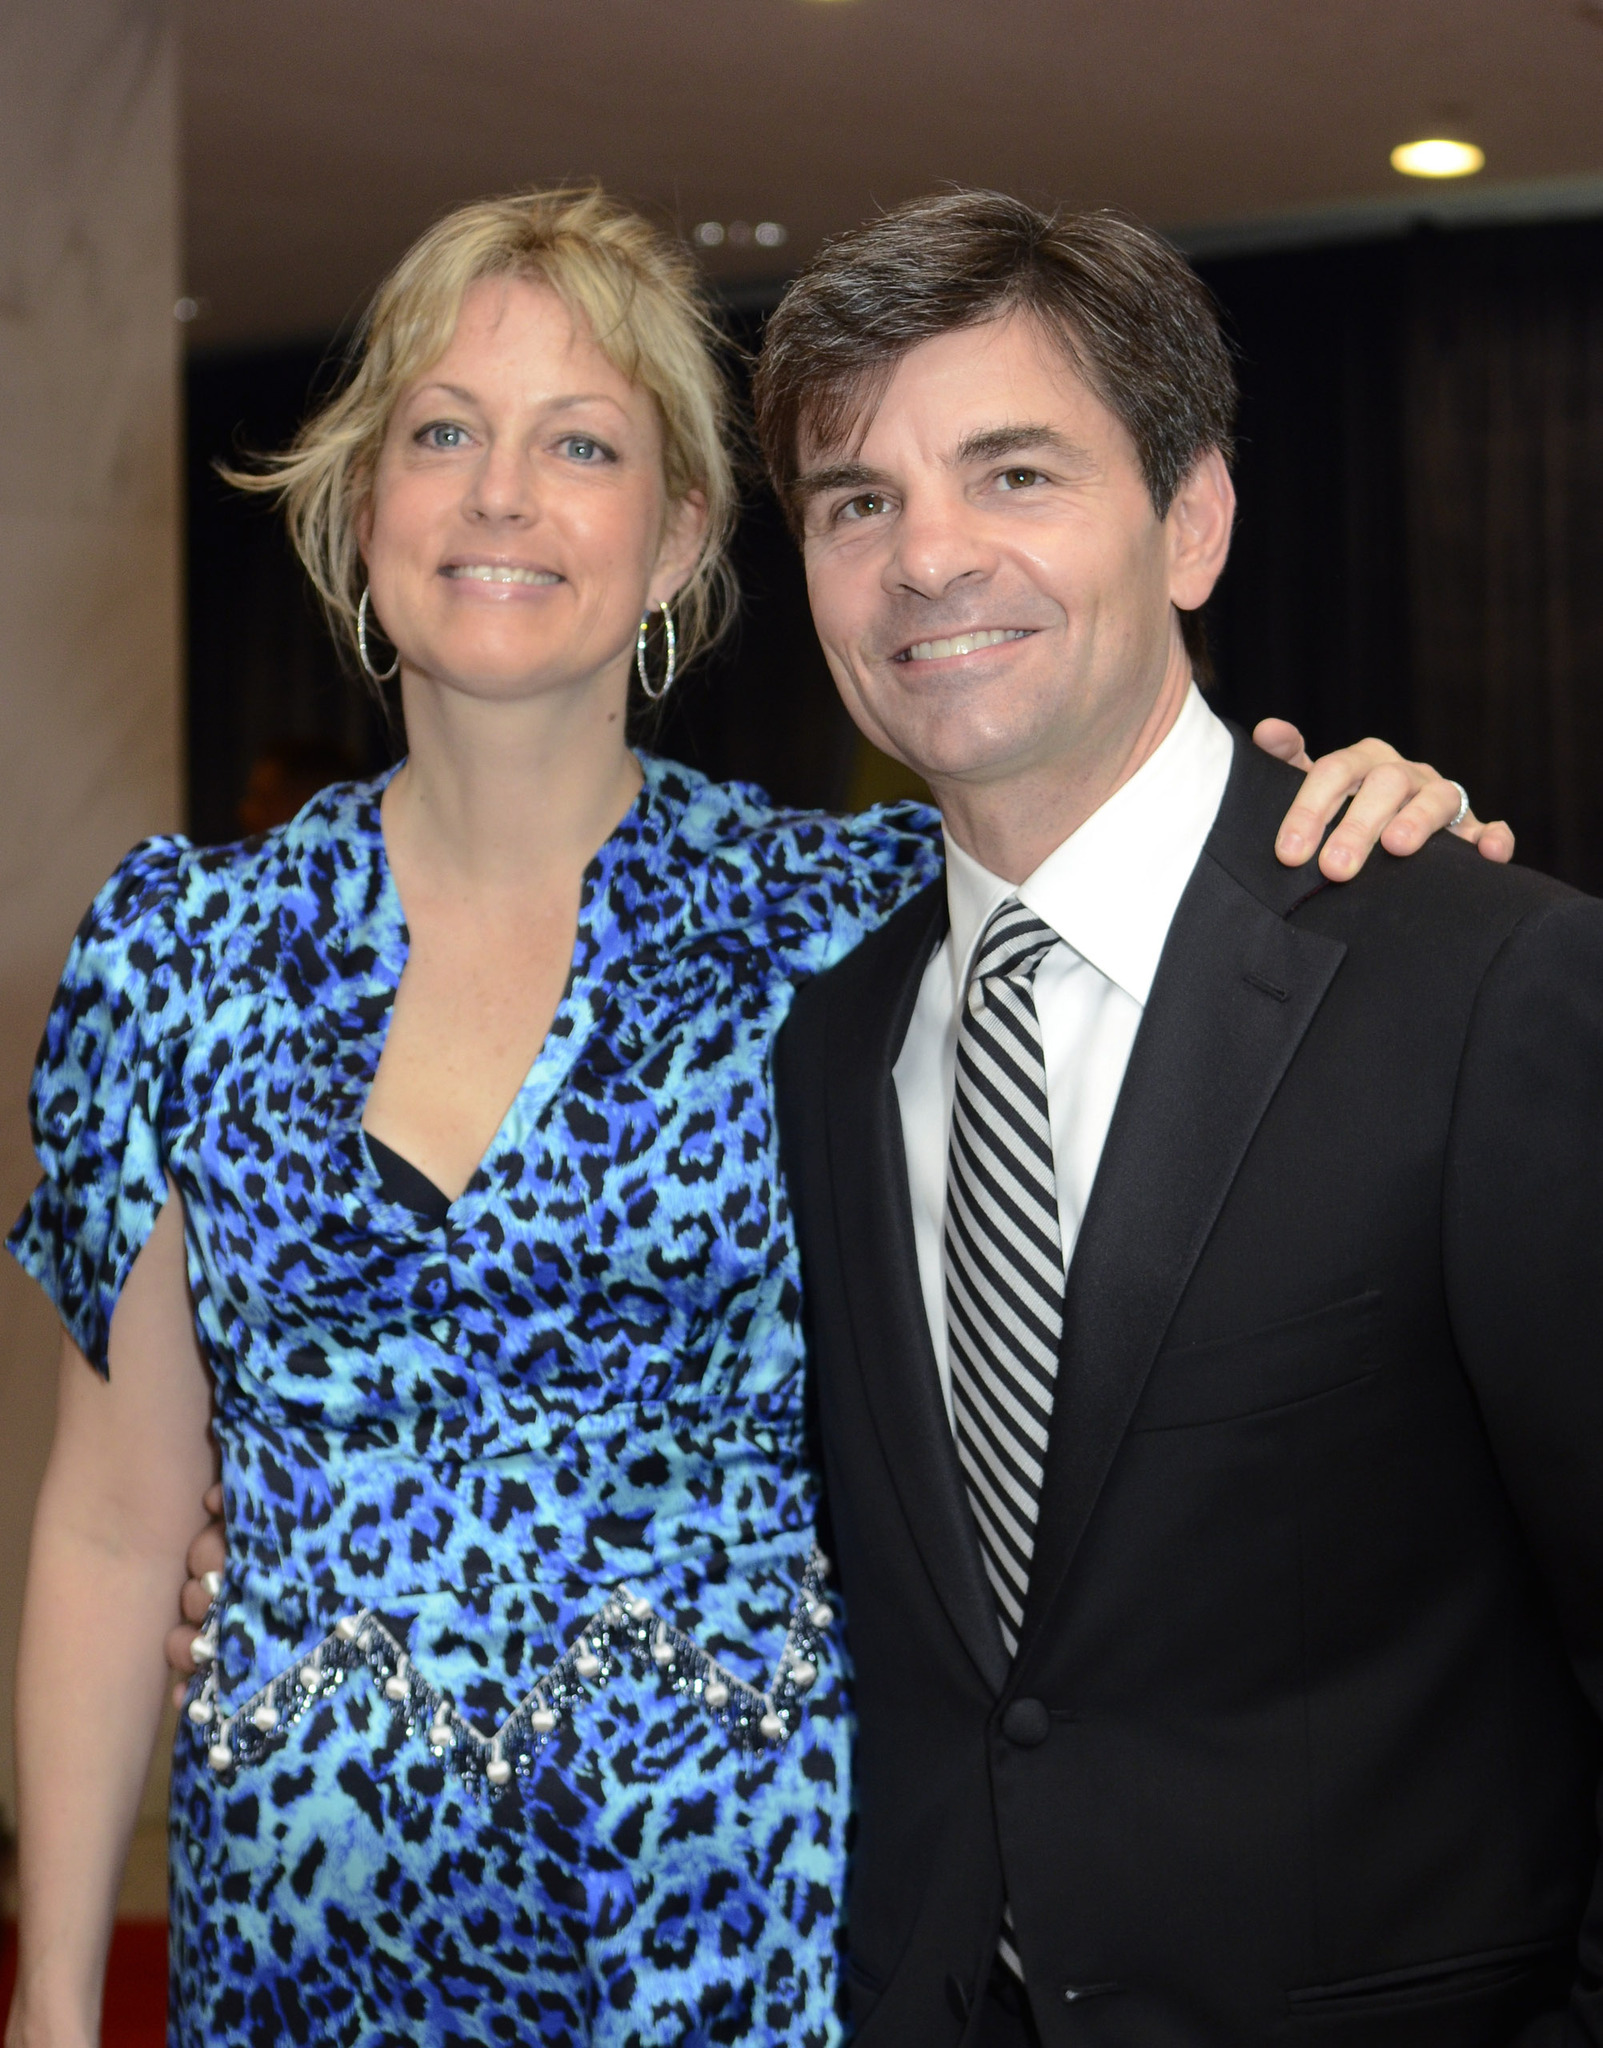 Alexandra Wentworth and George Stephanopoulos